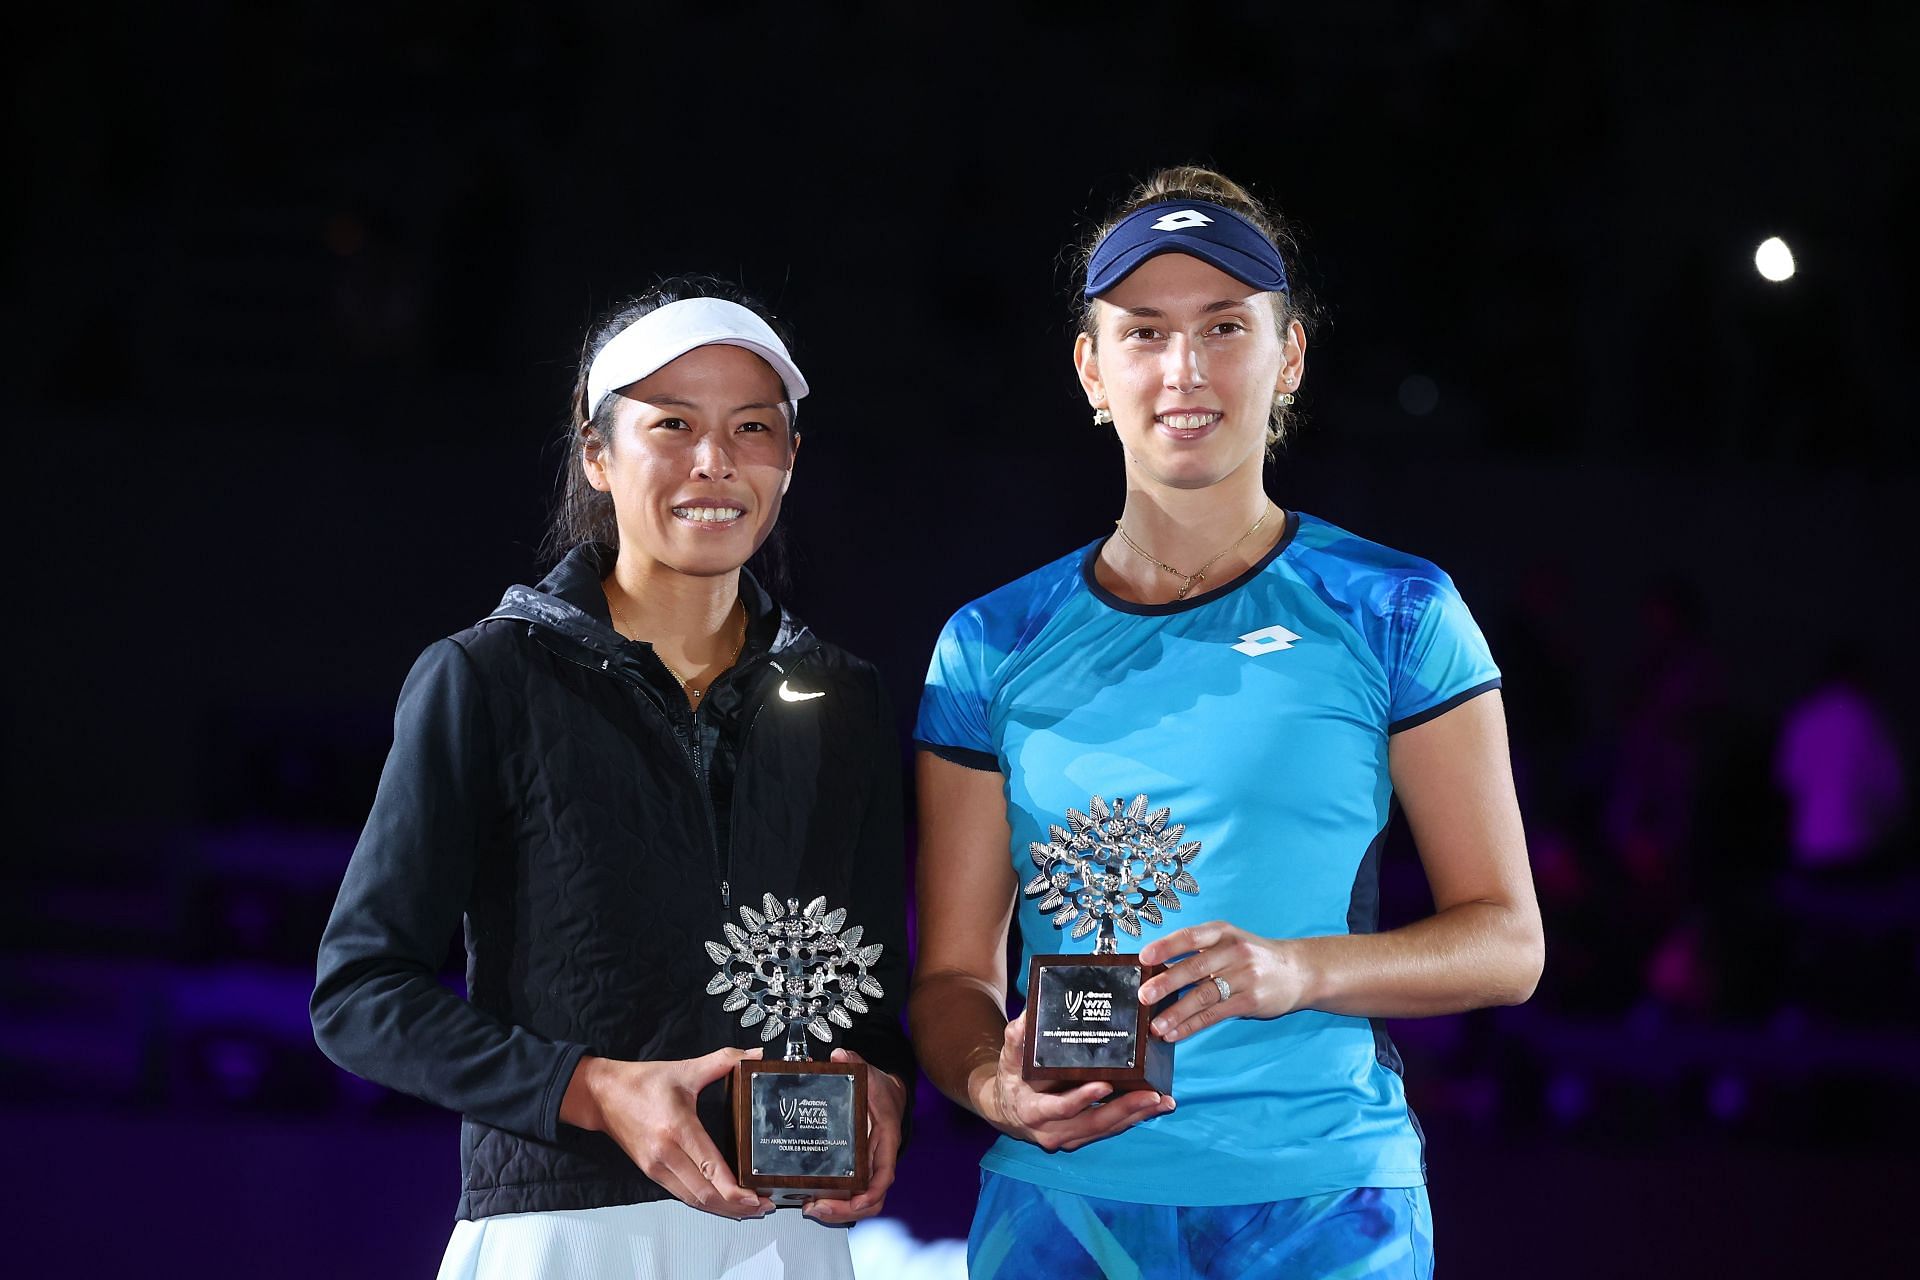 Elise Mertens and Hsieh Su-Wei will look to win their second Grand Slam as a team